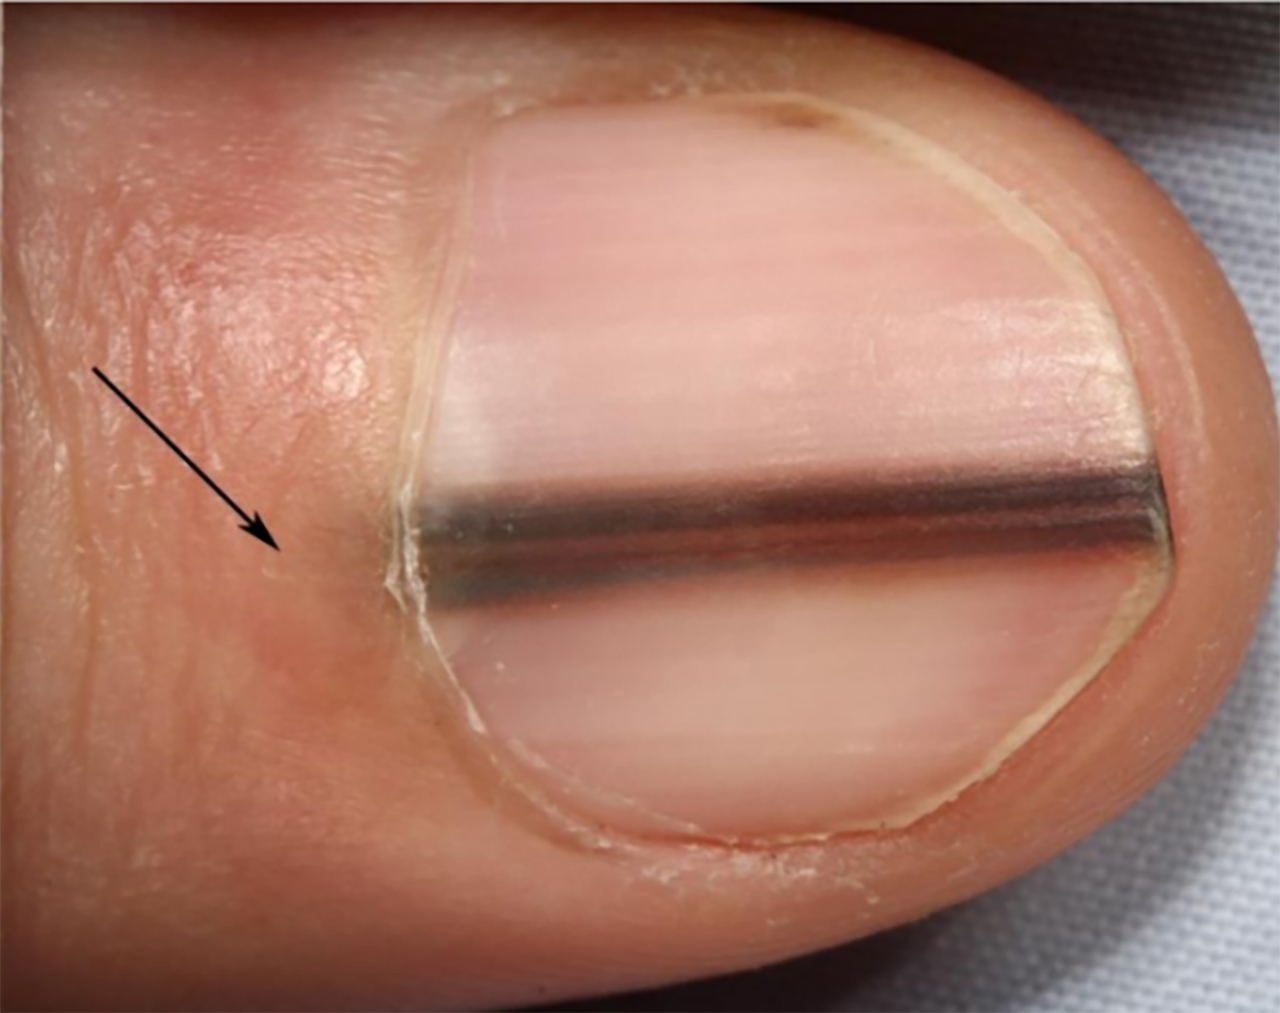 Why are there black lines on nails?